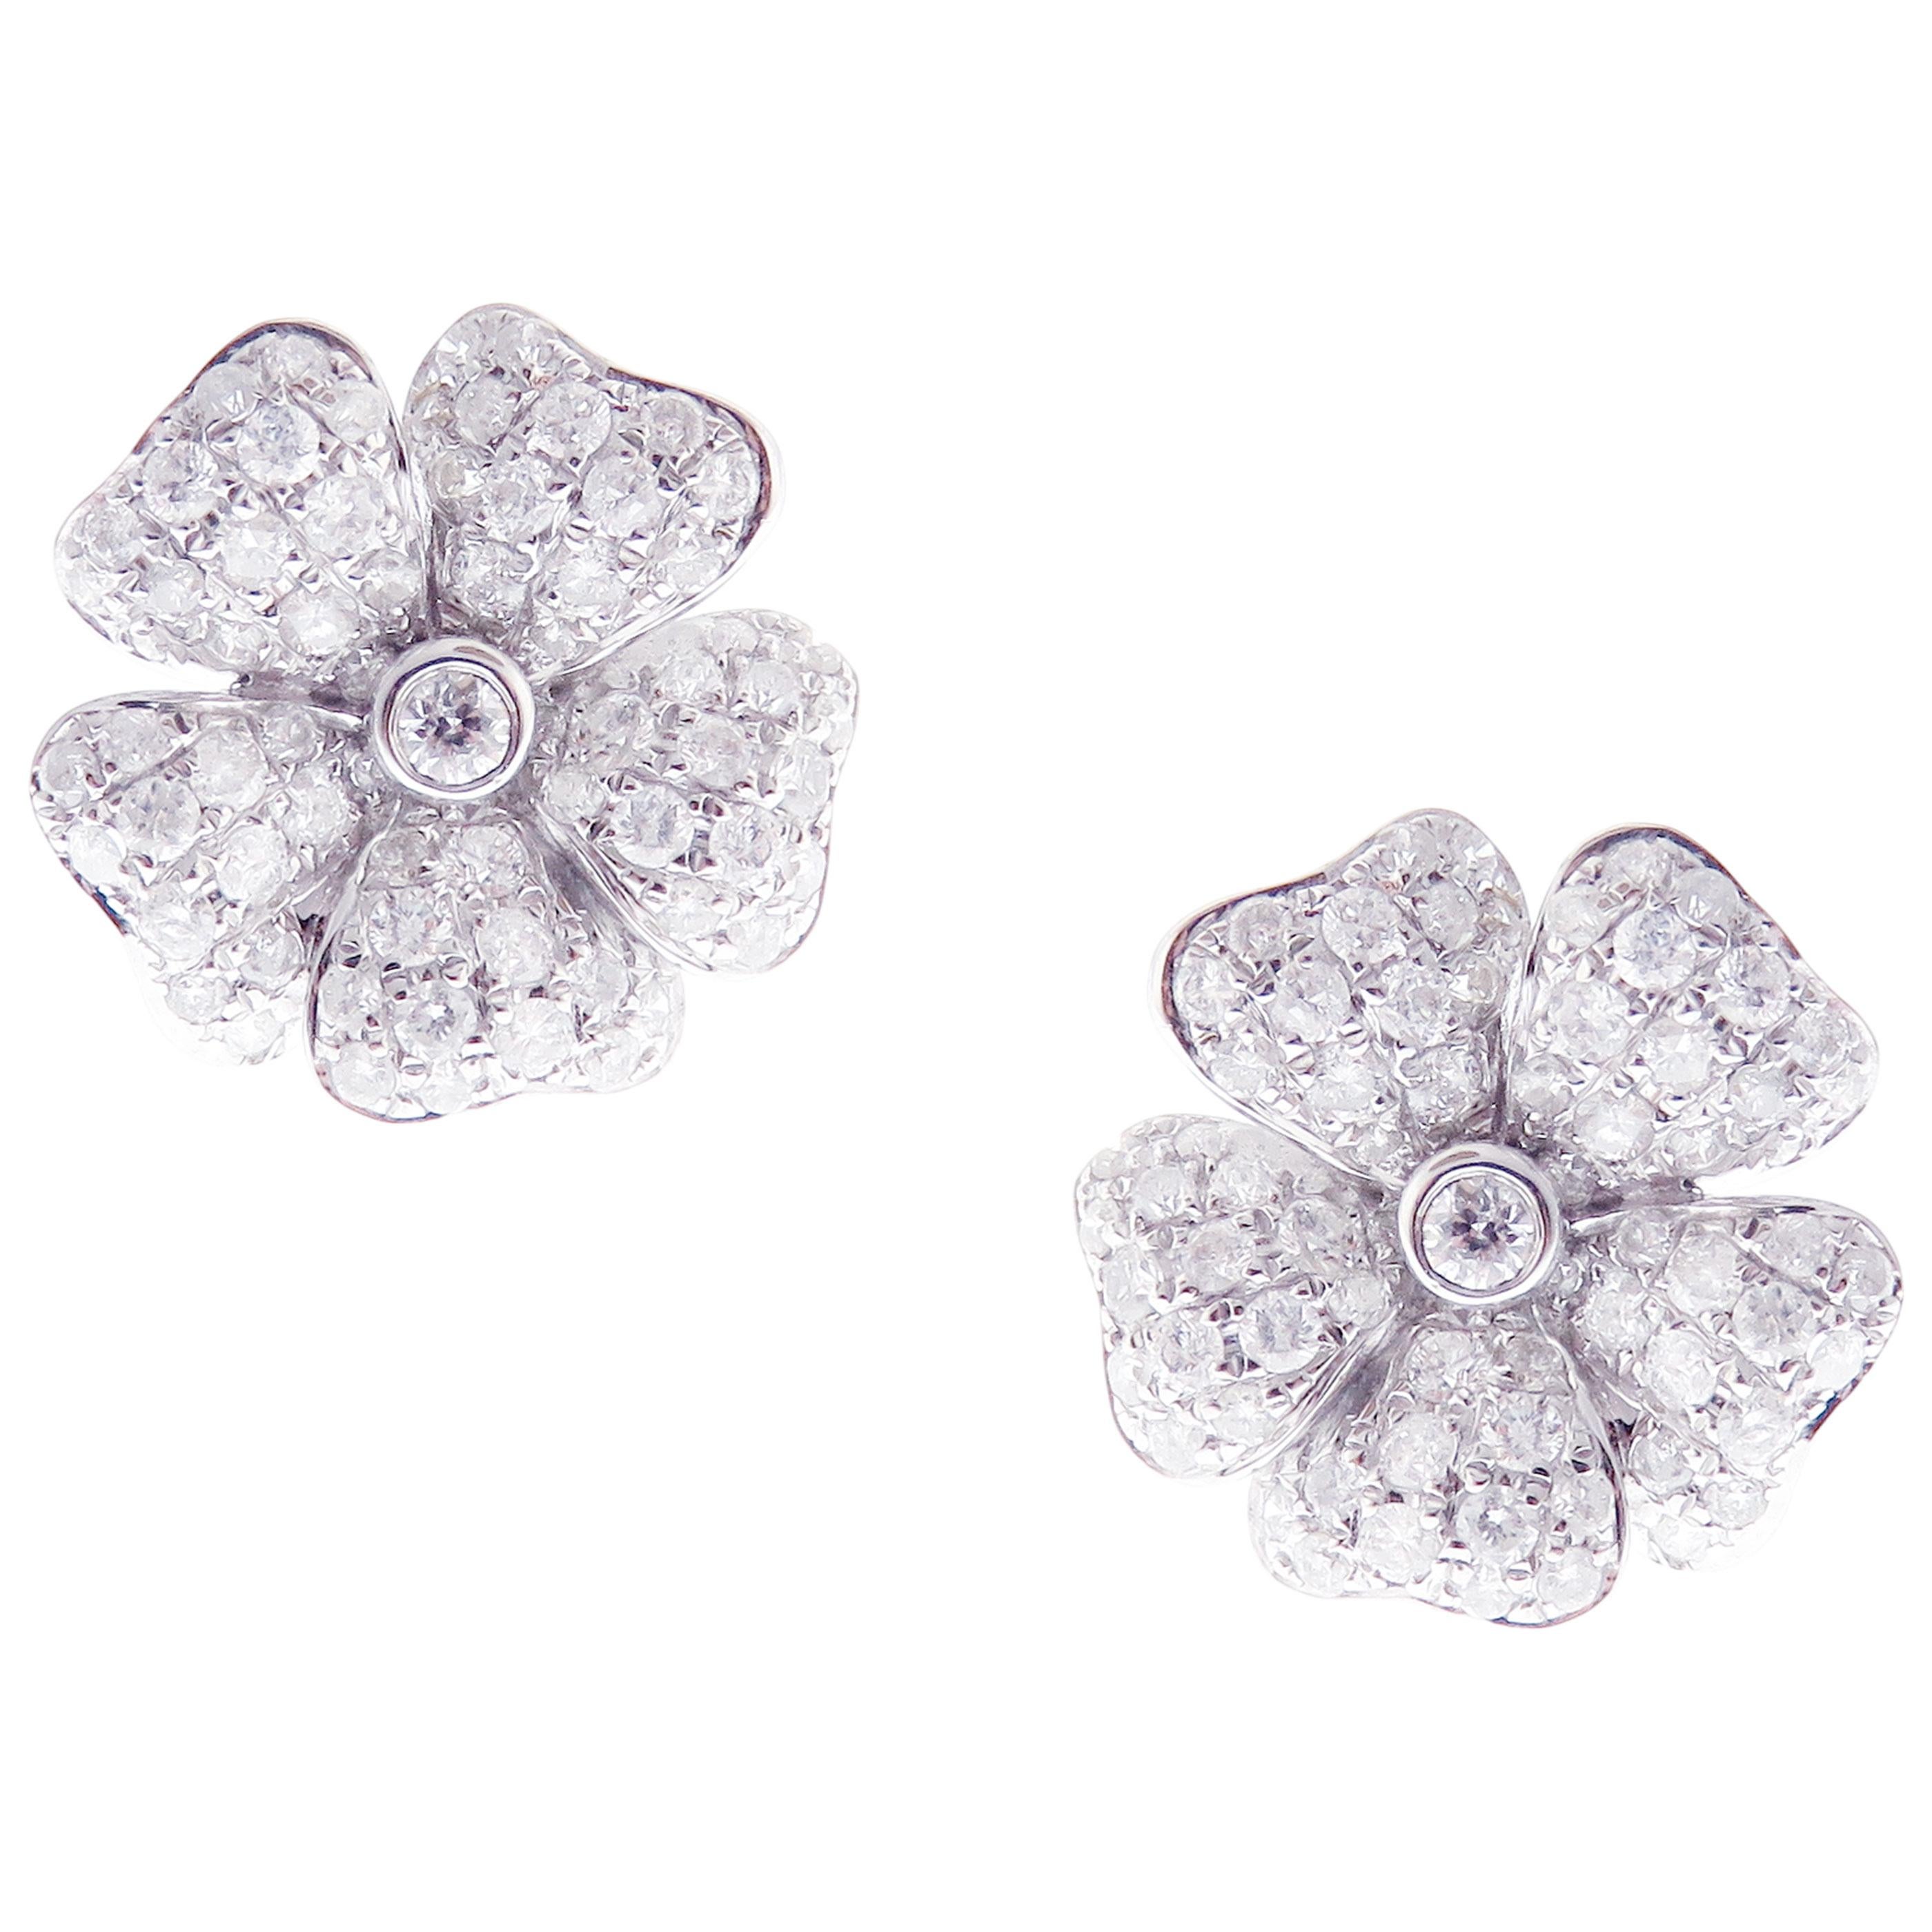 This medium diamond classic pave five petals flower earring is crafted in 18-karat white gold, featuring 144 round white diamonds totaling of 1.14 carats. 
Approximate total weight 4.30 grams.
These earrings come with push back post backings.
SI-G